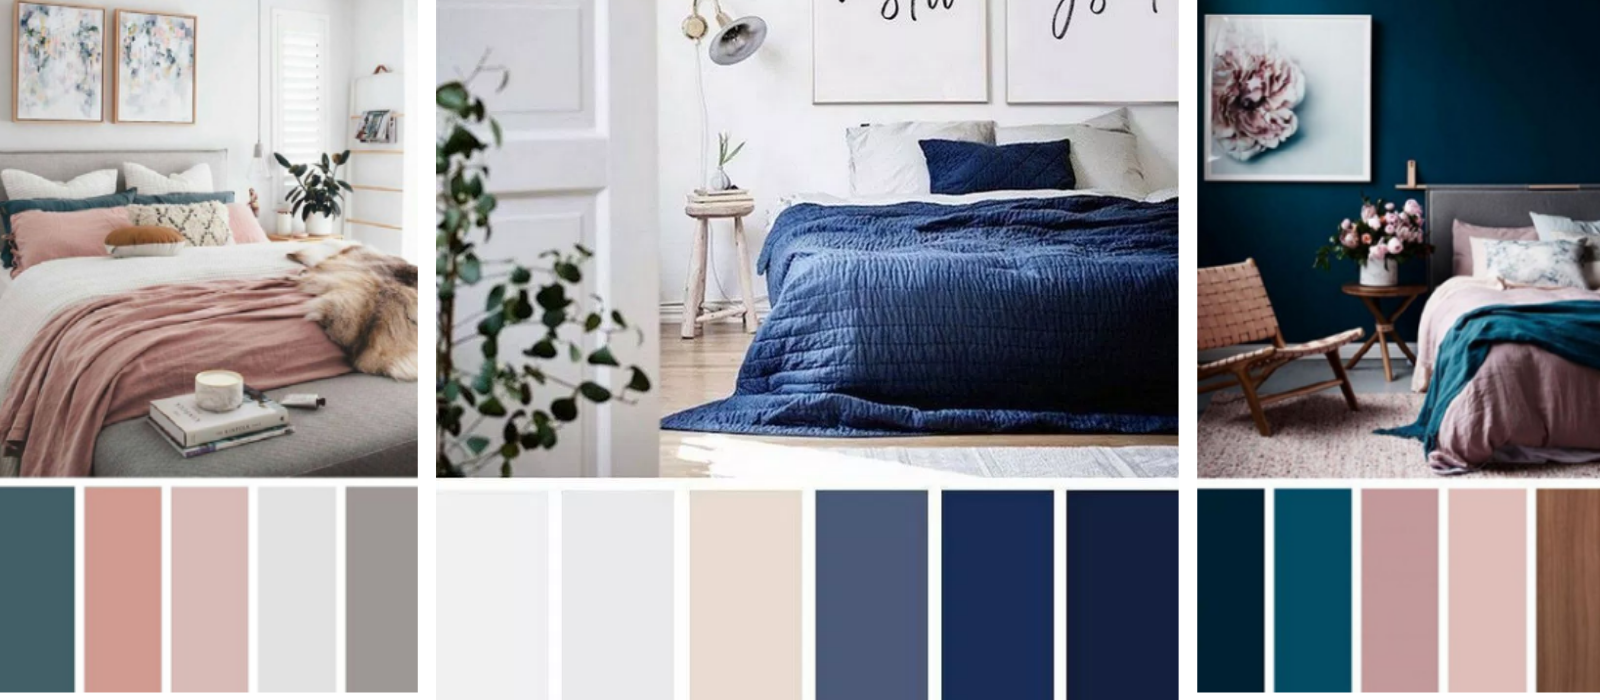 How to select a colour palette scheme for your house home